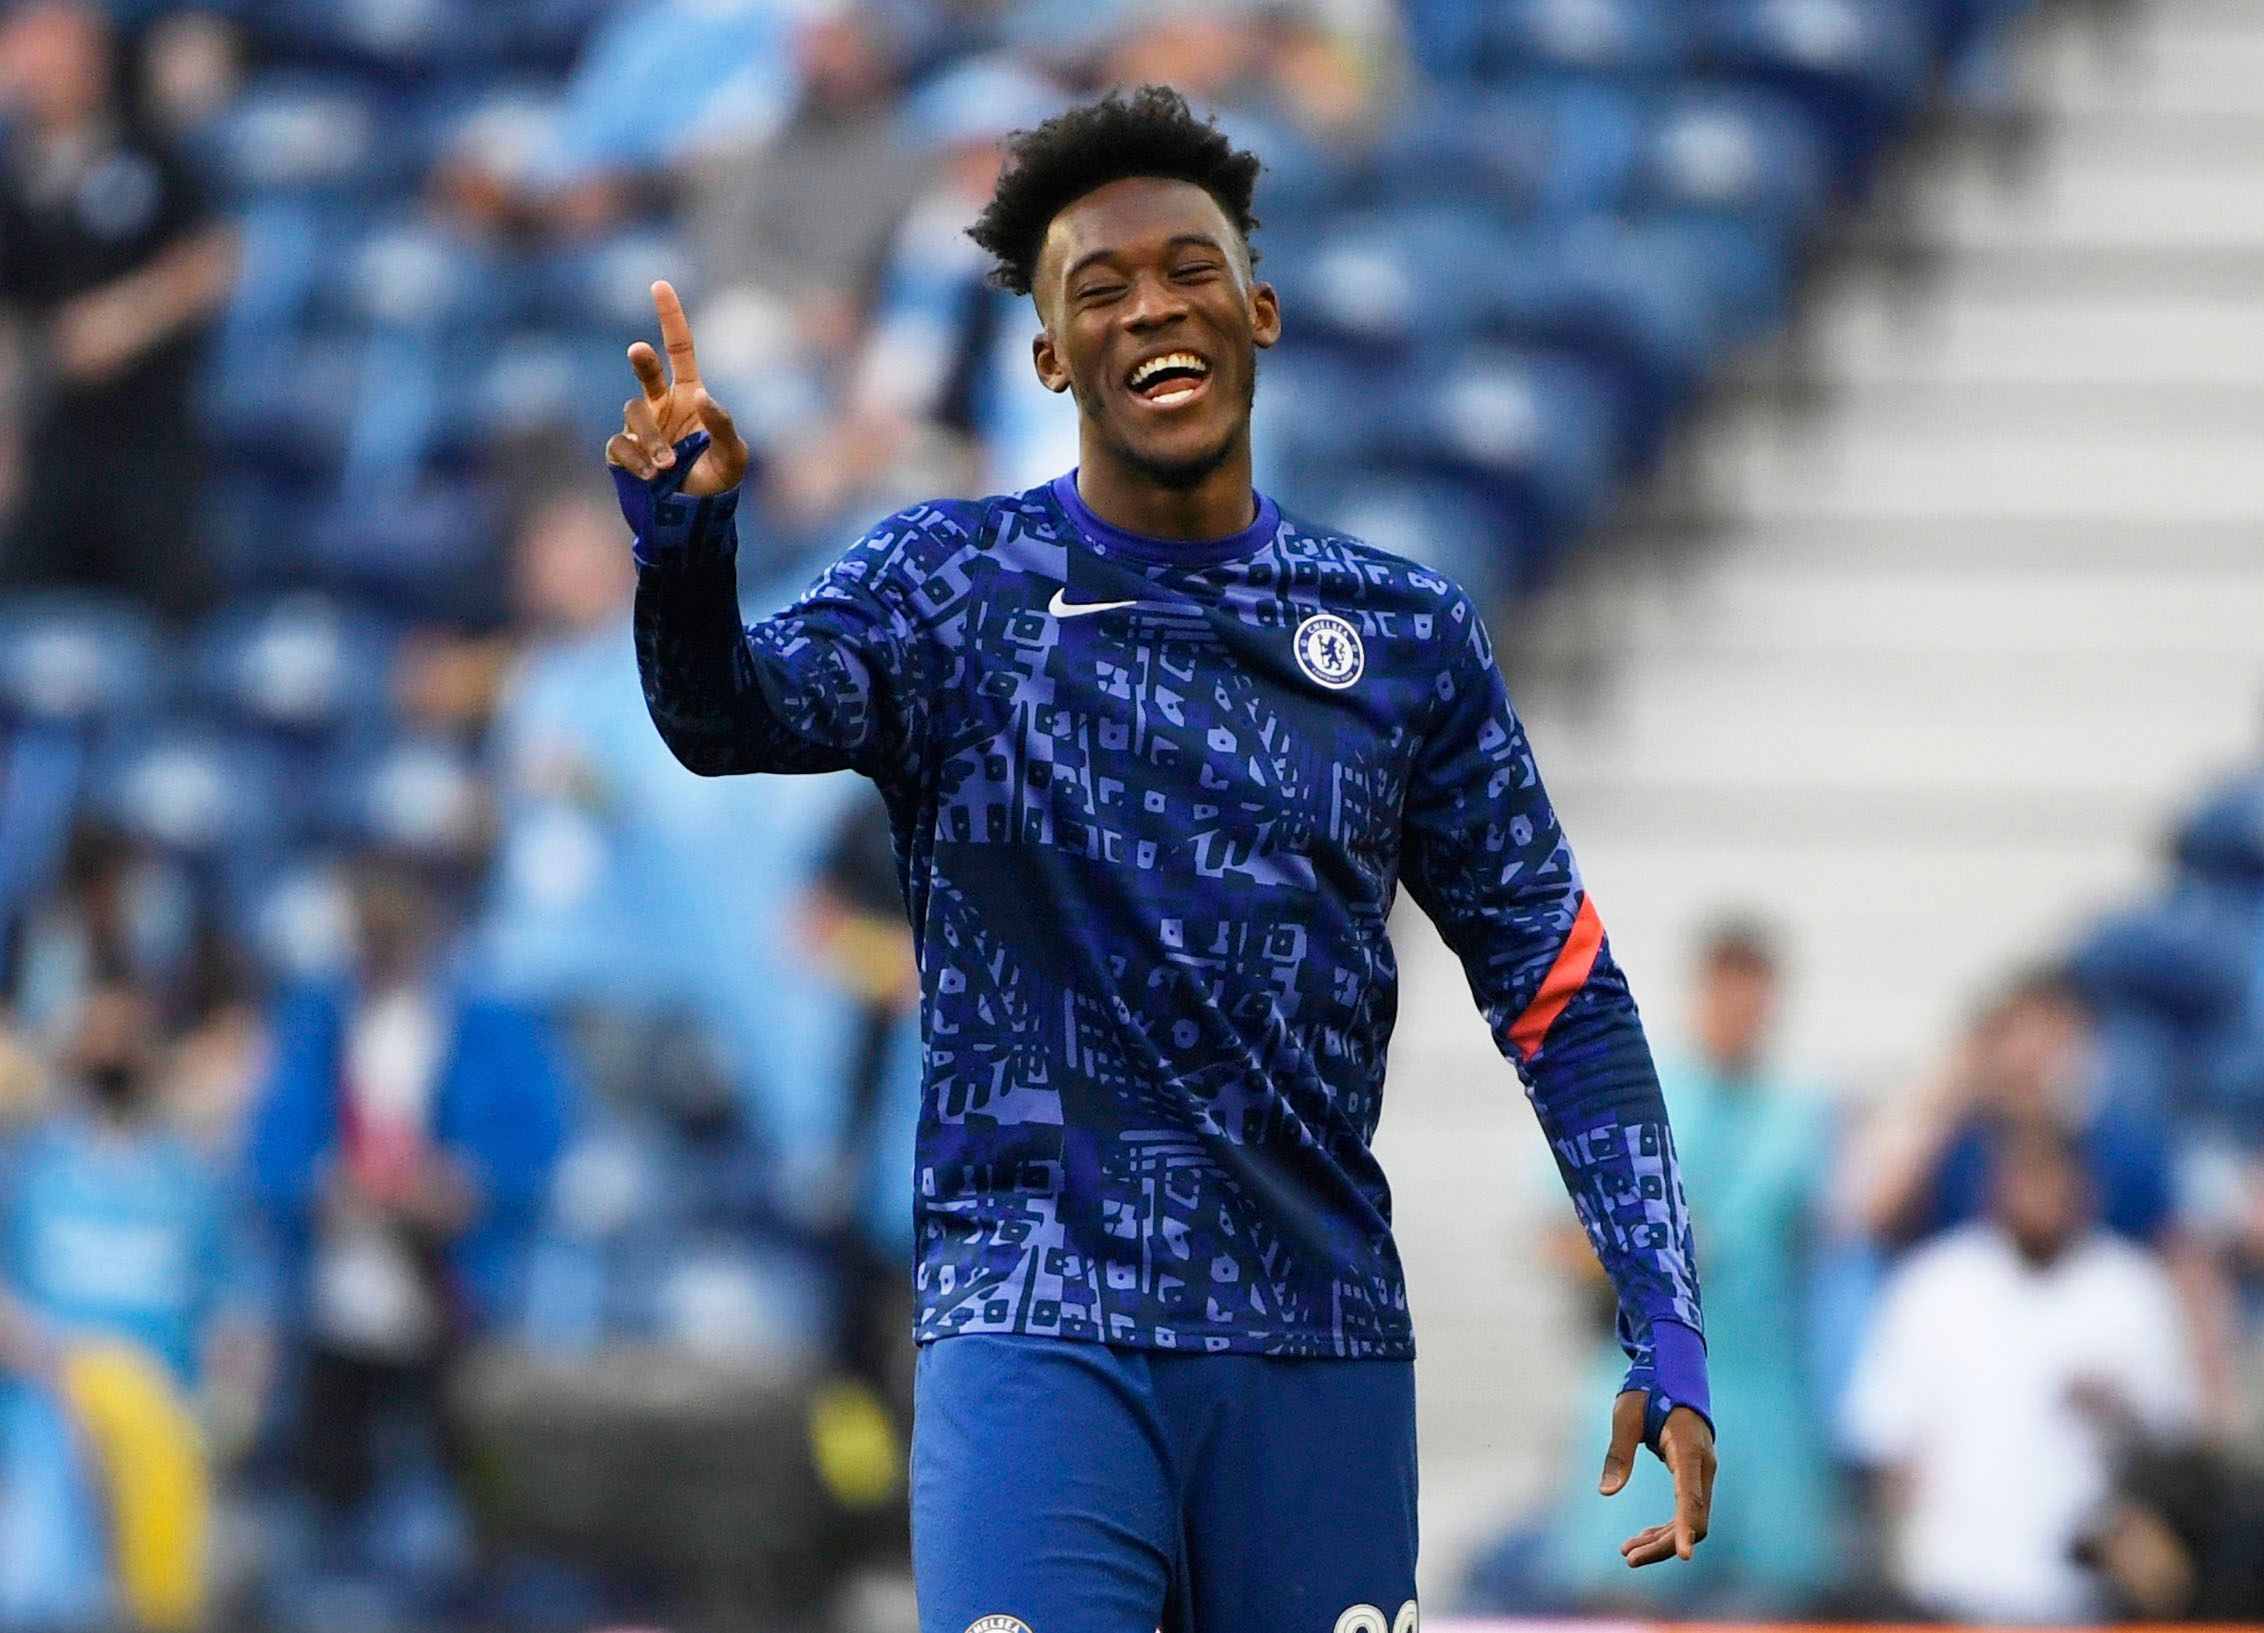 Soccer Football - Champions League Final - Manchester City v Chelsea - Estadio do Dragao, Porto, Portugal - May 29, 2021  Chelsea's Callum Hudson-Odoi during the warm up before the match Pool via REUTERS/Pierre-Philippe Marcou